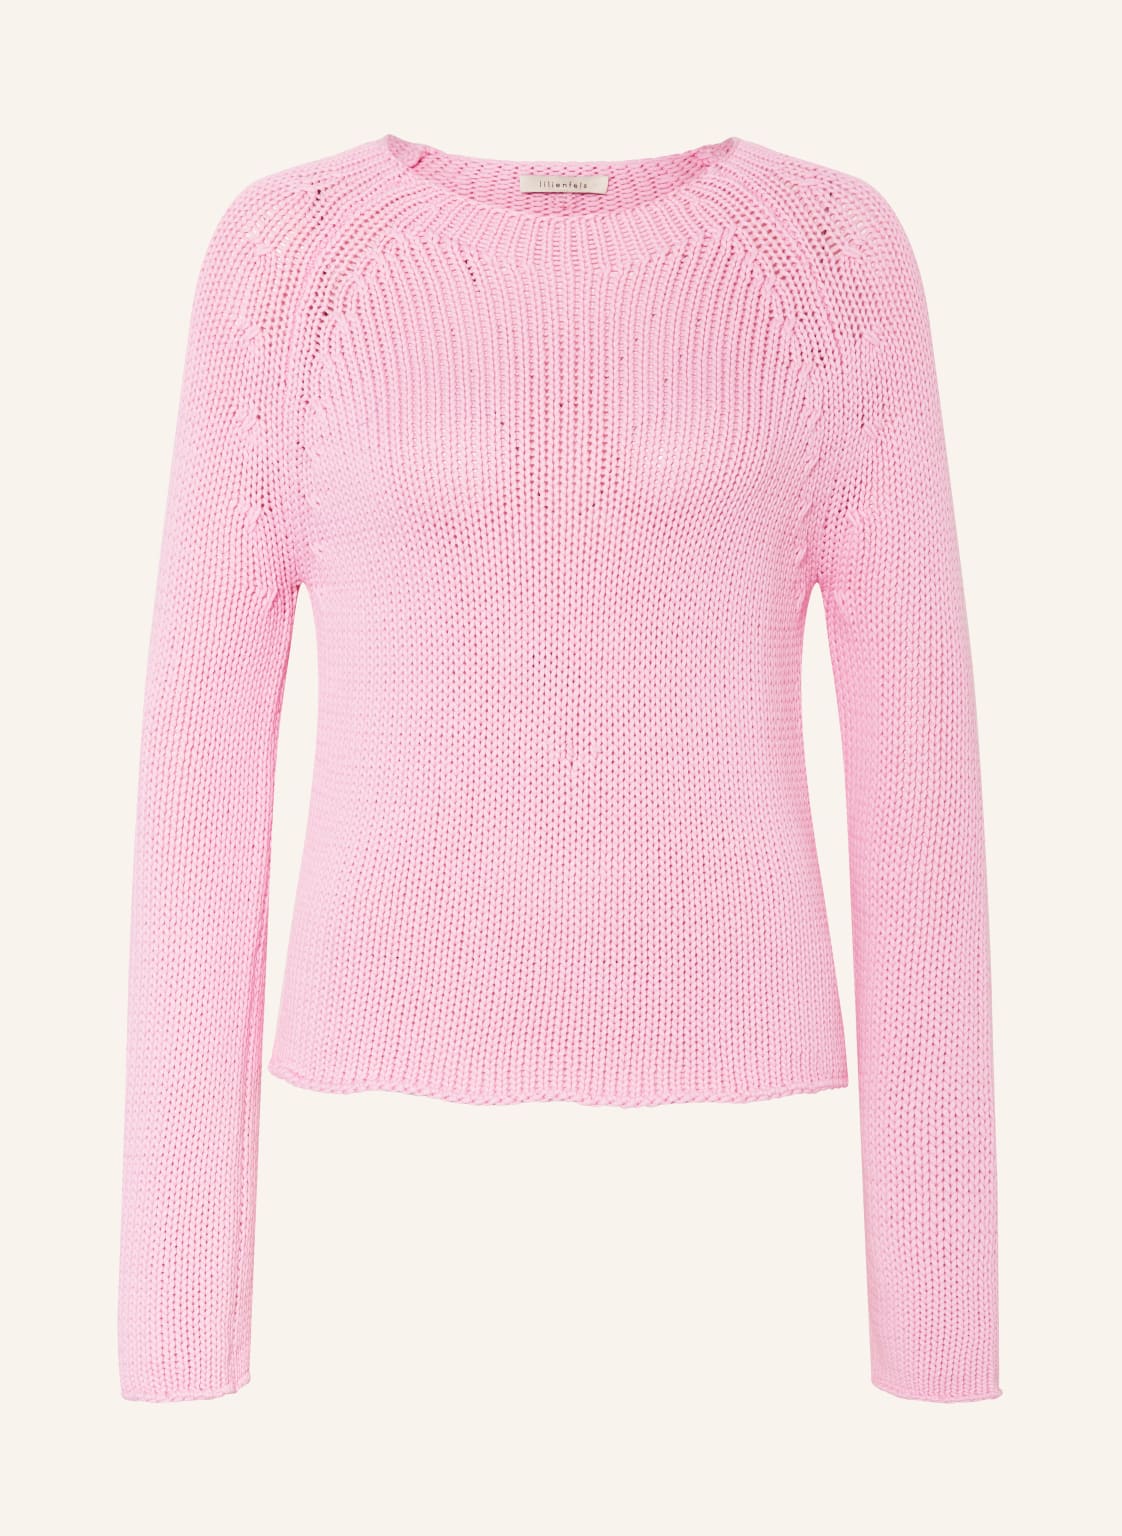 Lilienfels Pullover rosa von lilienfels